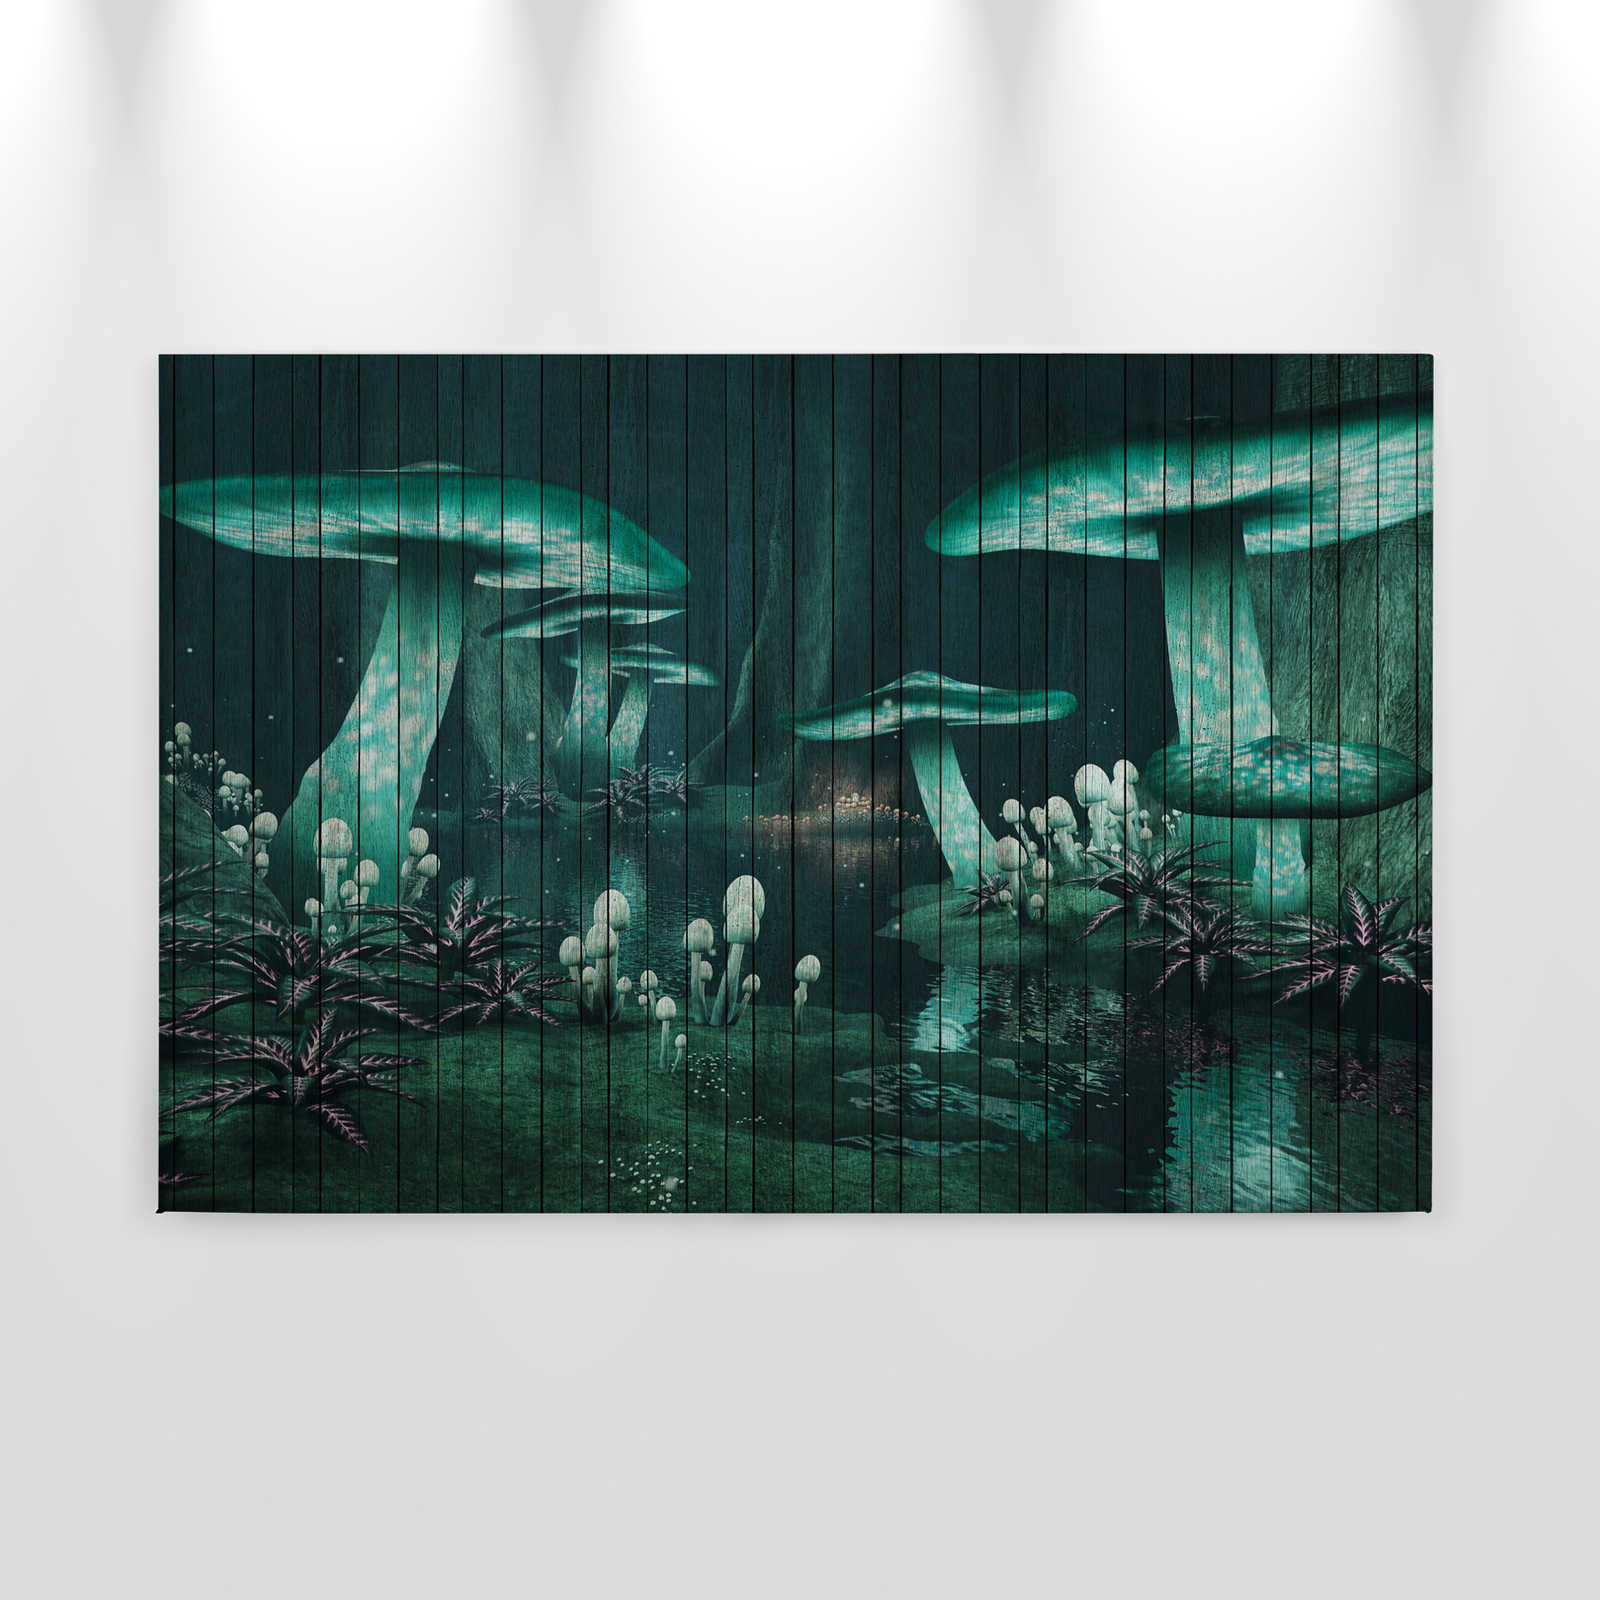             Fantasy 1 - Canvas painting Enchanted forest with wood look - 0,90 m x 0,60 m
        